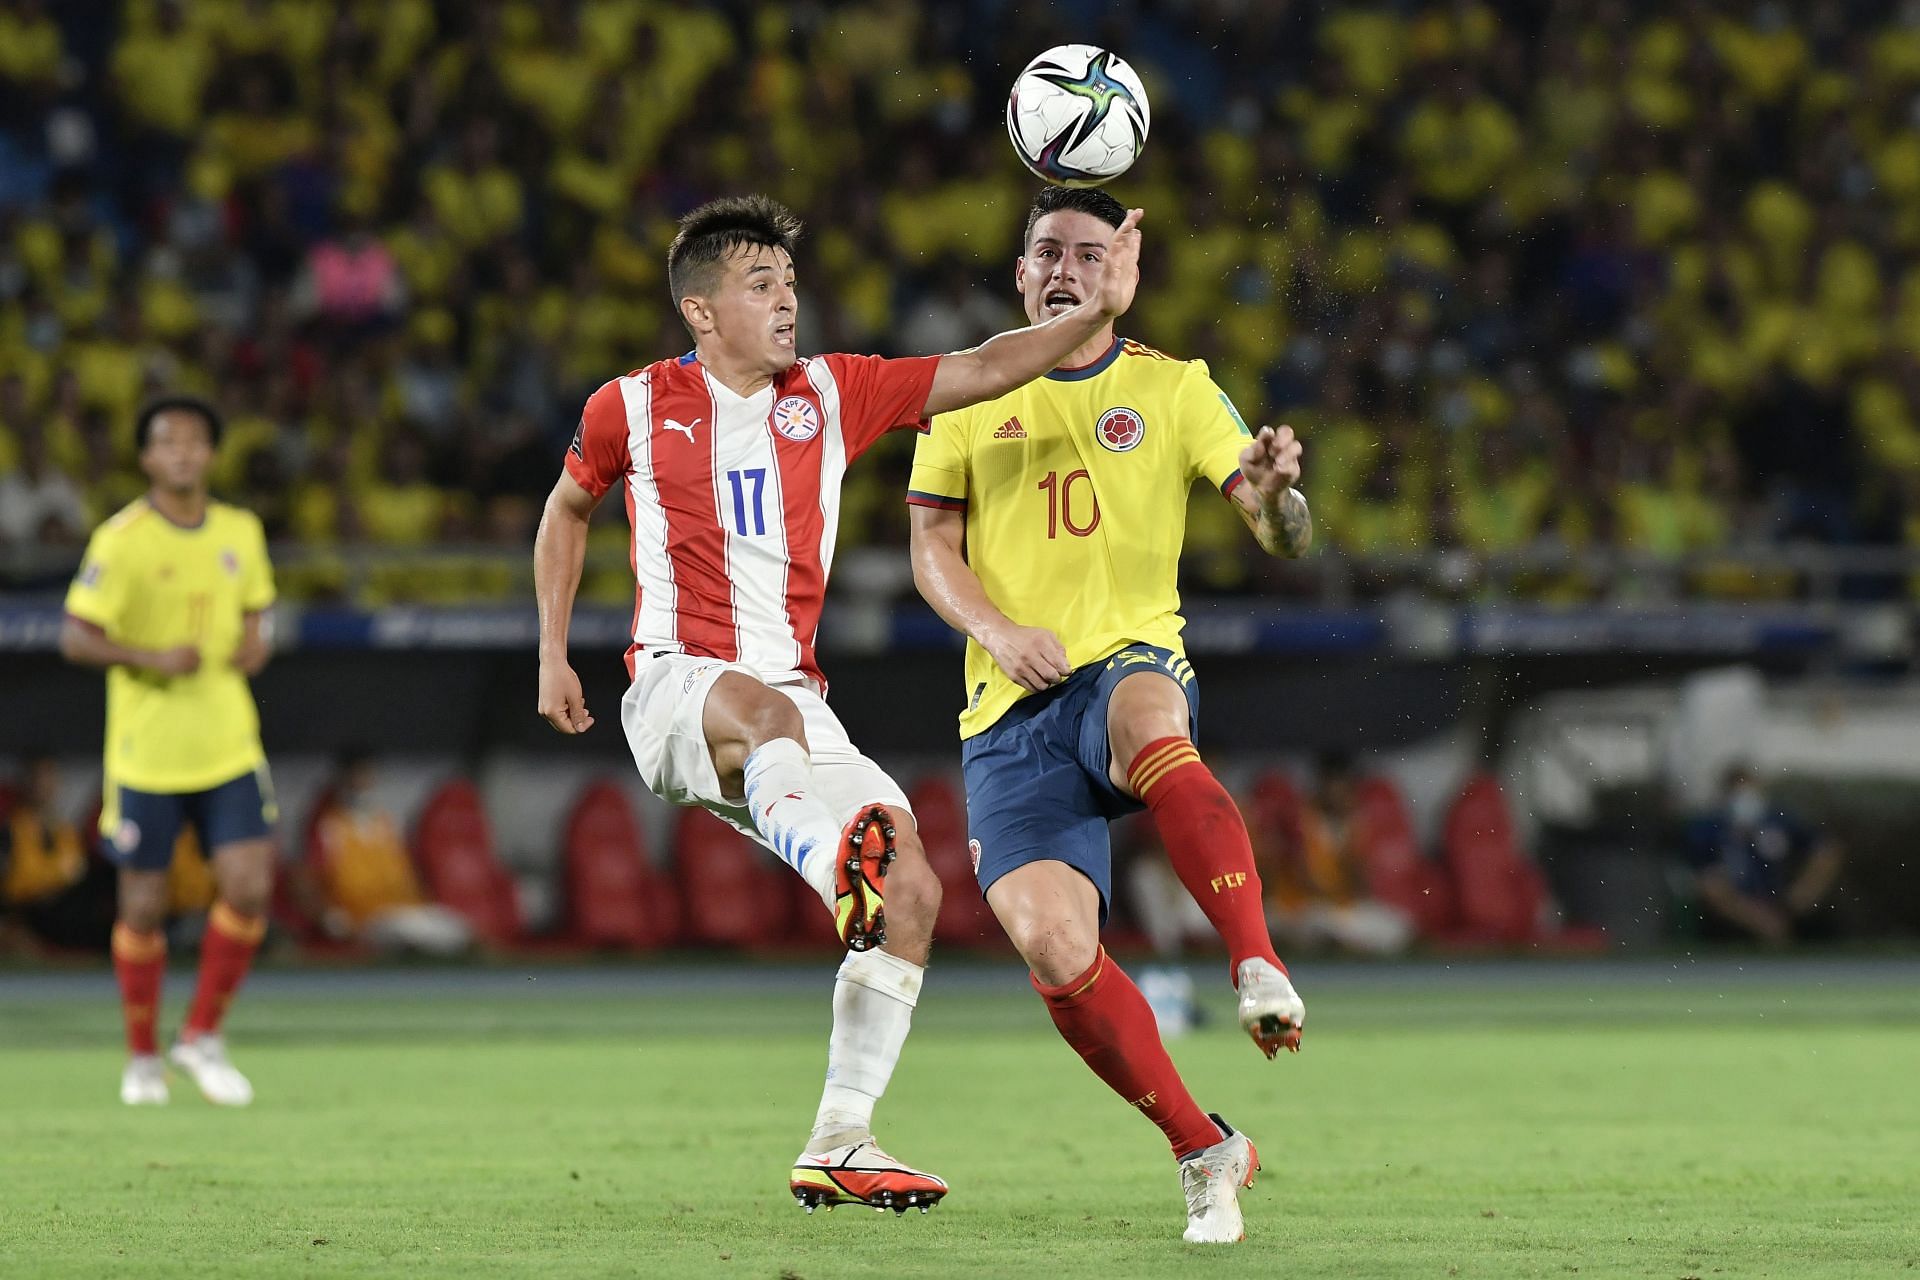 Colombia vs paraguay